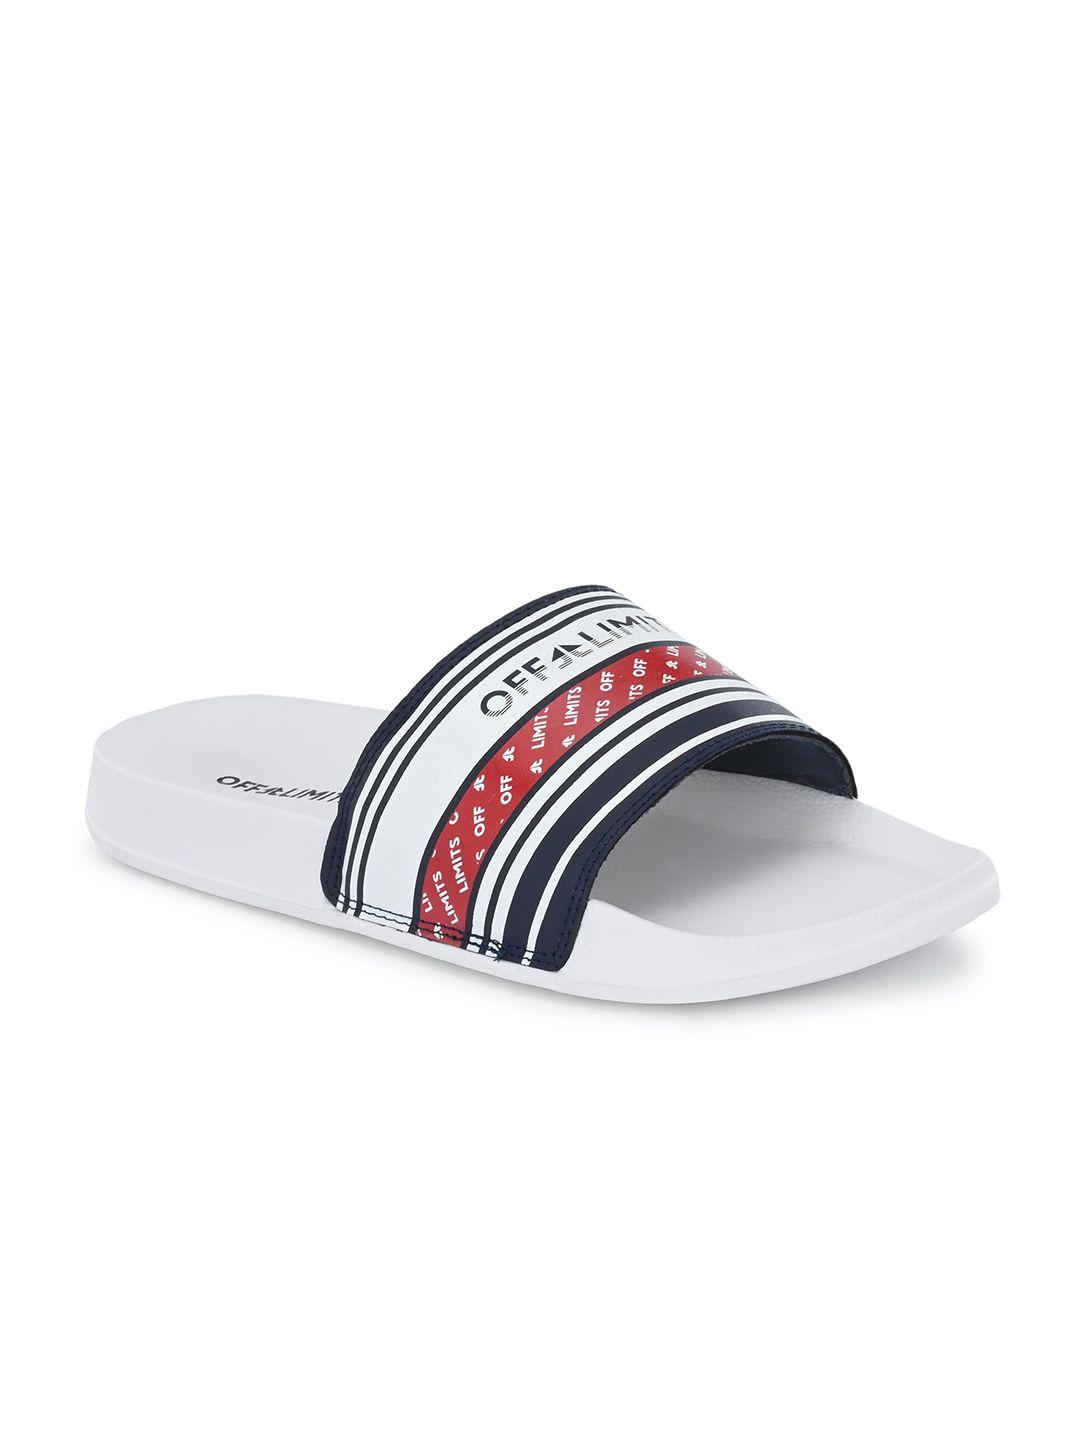 off limits men white & blue printed sliders